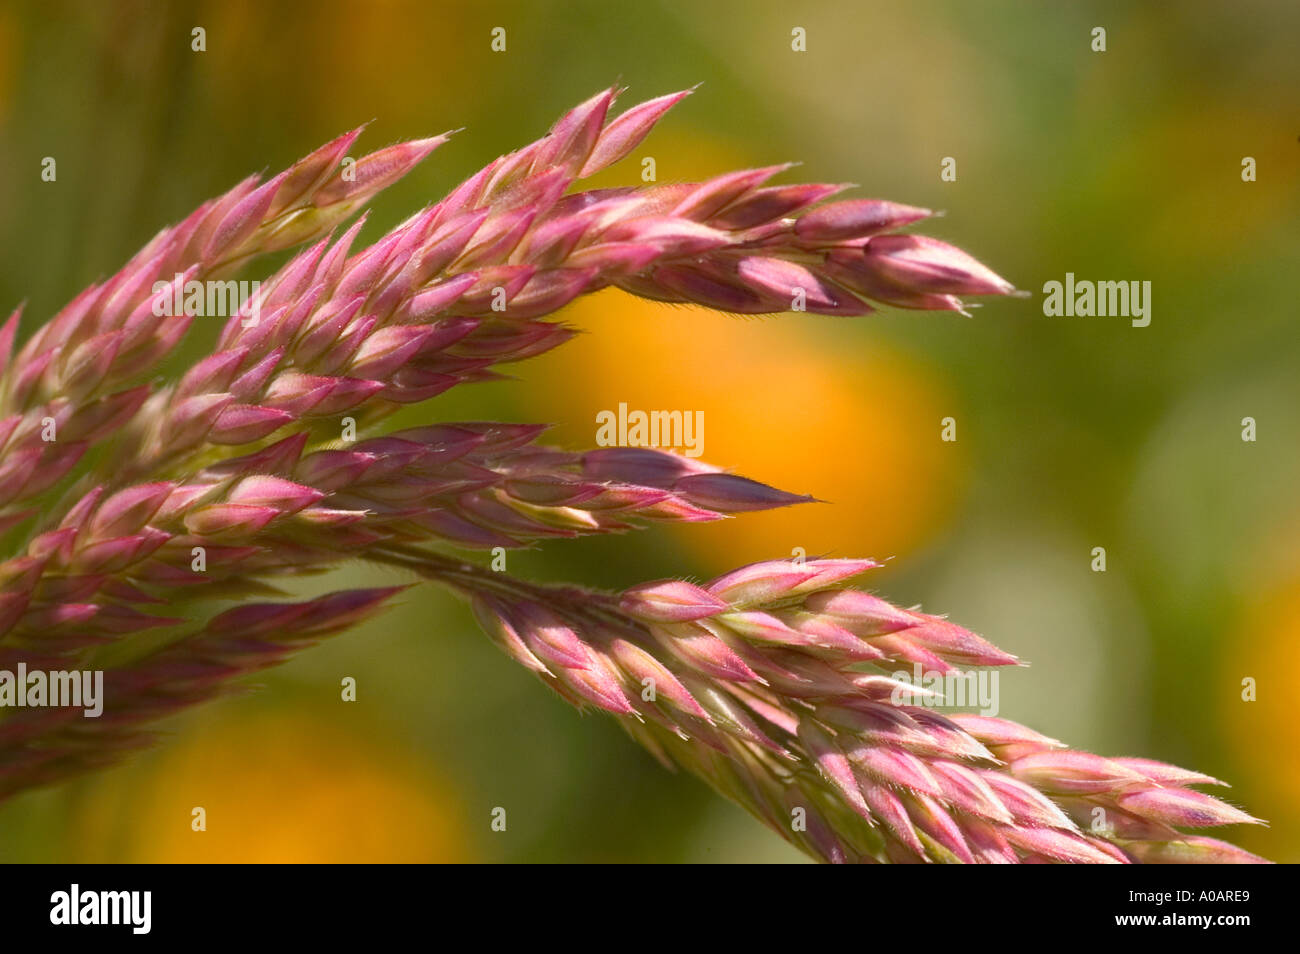 A closeup color horizontal image of closed spikelets of creeping bentgrass with blurred yellow flowers in the background Stock Photo